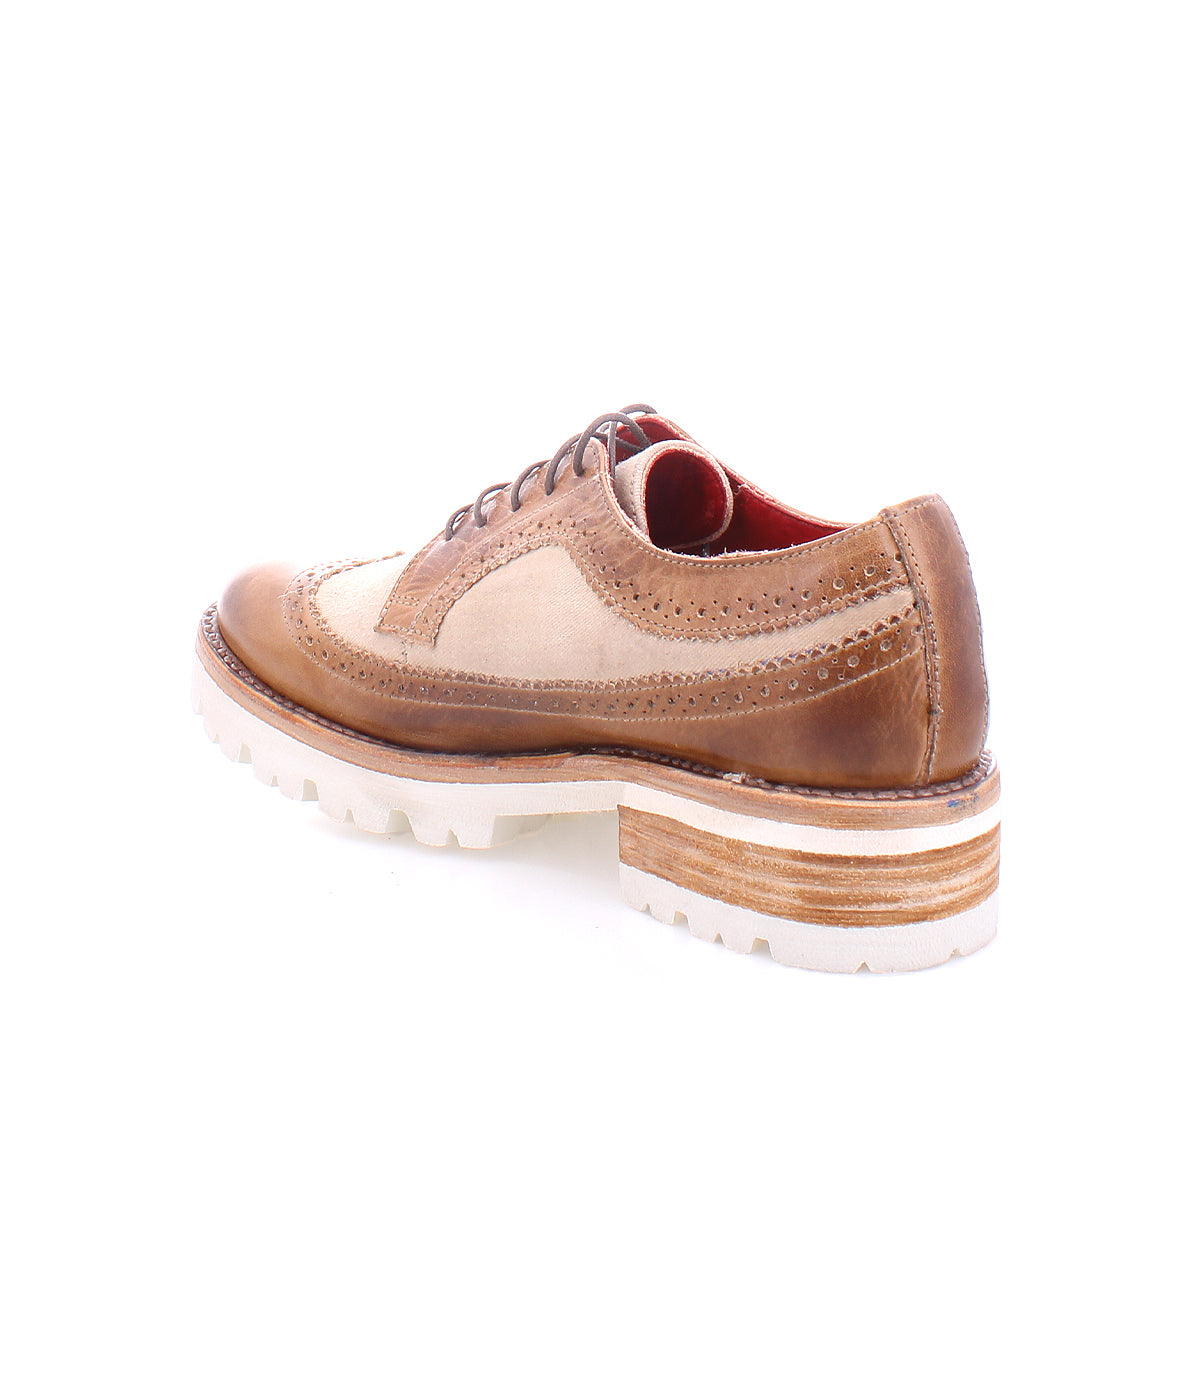 A retro chic men's Lita K III lace up shoe in tan and white, perfect for the fall wardrobe by Bed Stu.